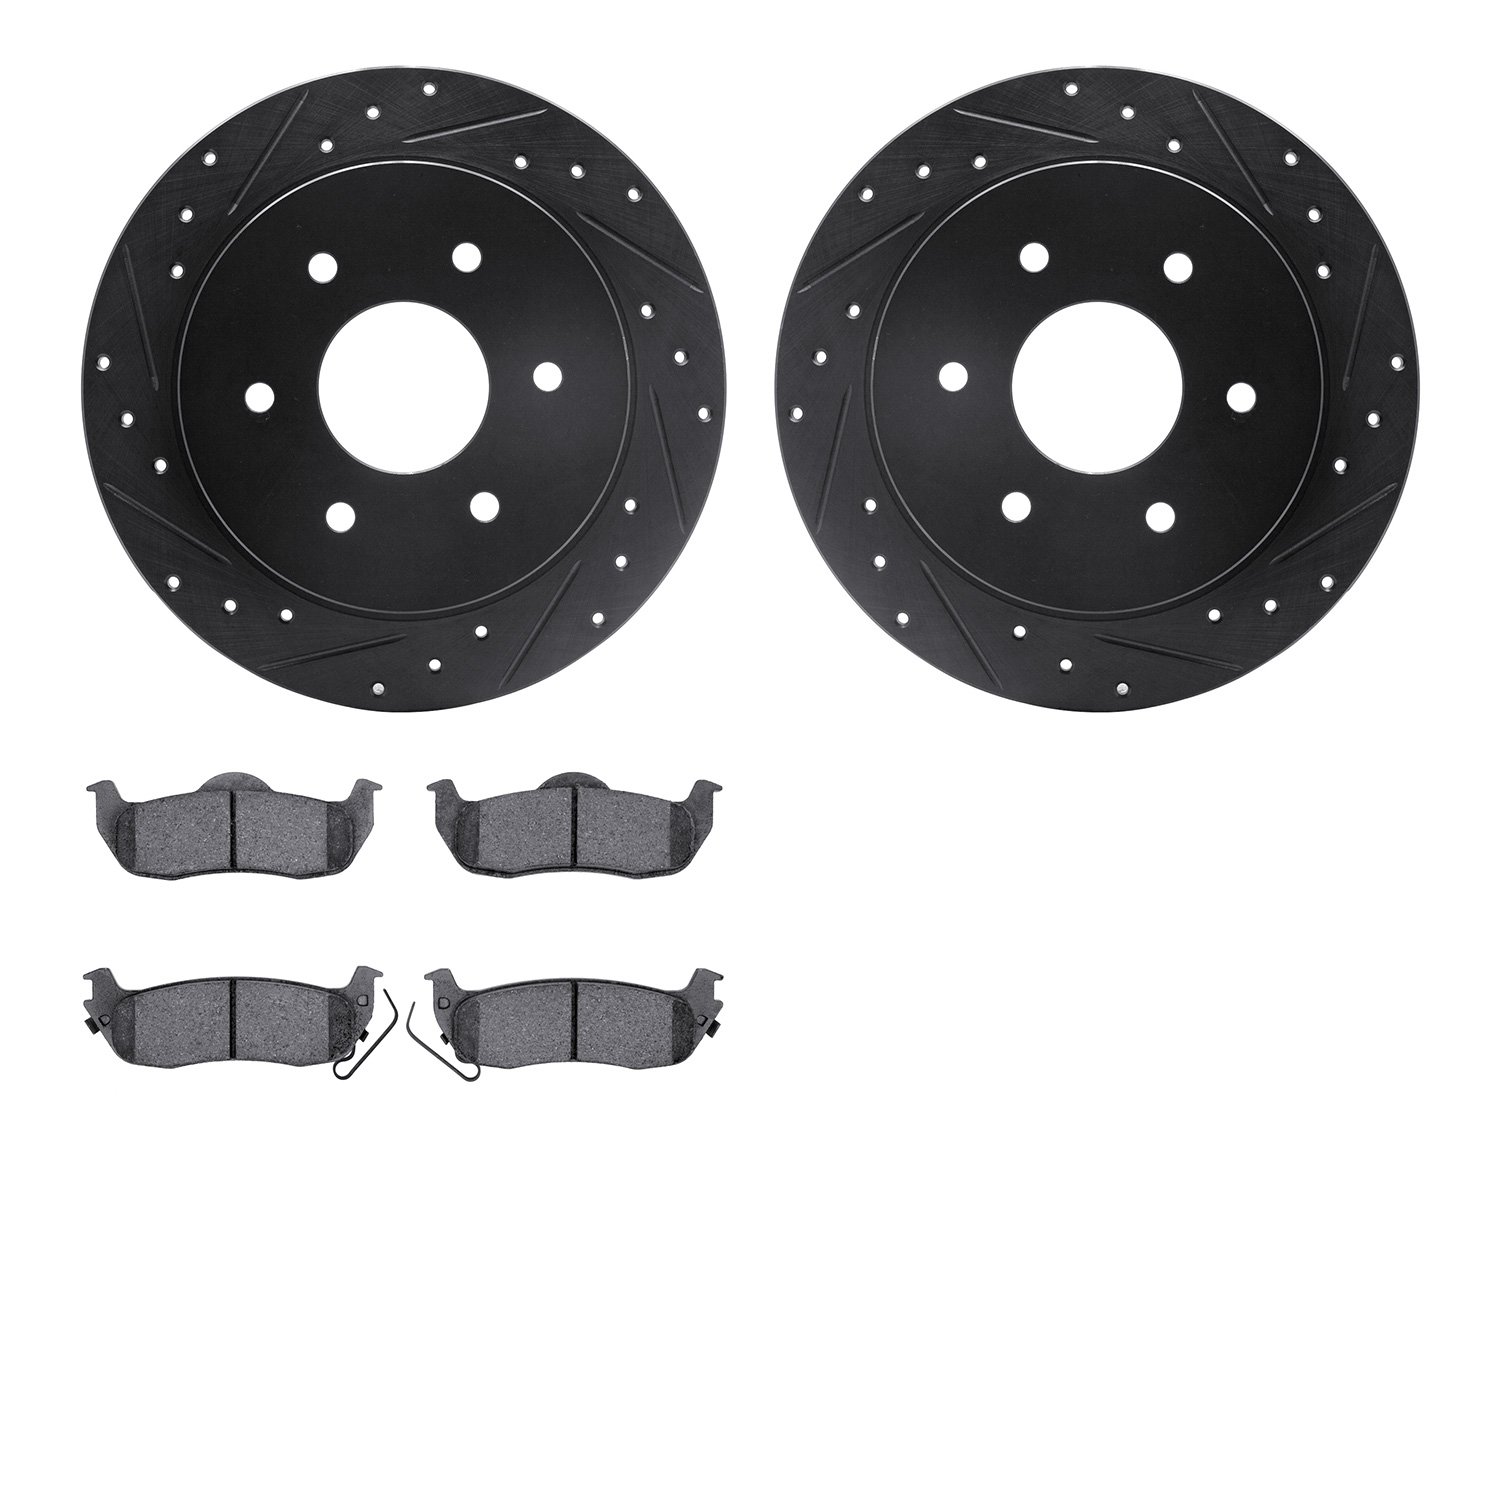 8402-67001 Drilled/Slotted Brake Rotors with Ultimate-Duty Brake Pads Kit [Black], 2004-2015 Infiniti/Nissan, Position: Rear